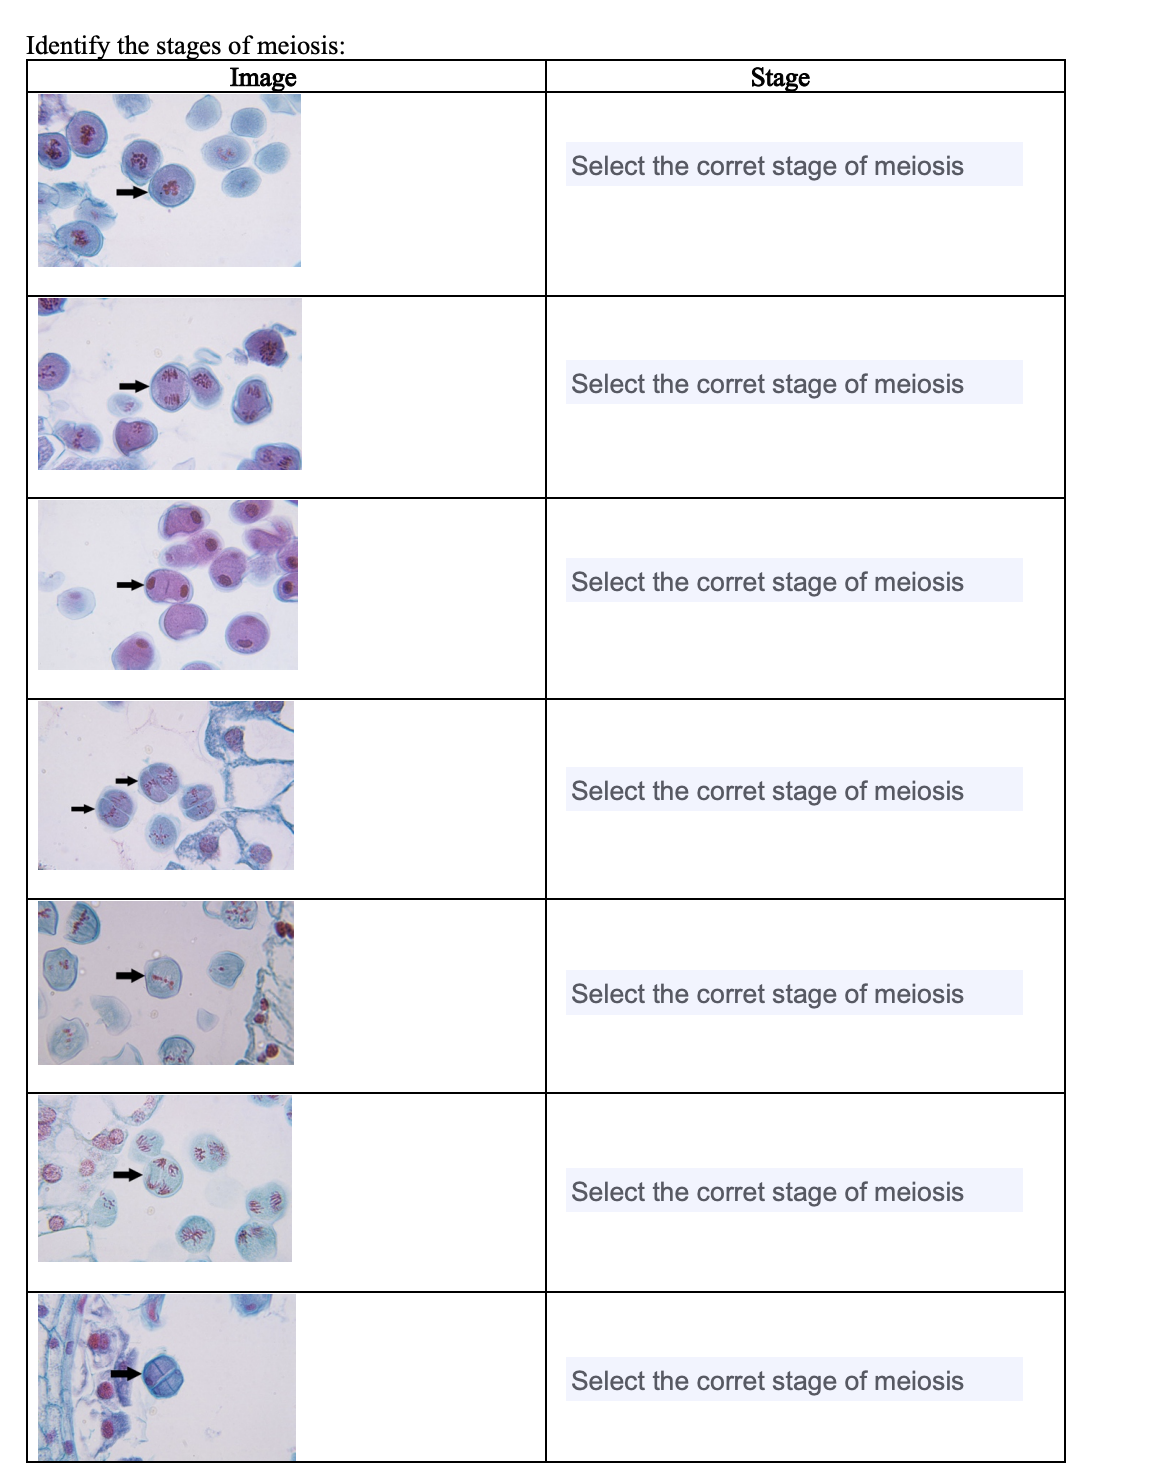 Identify the stages of meiosis:
Image
Stage
Select the corret stage of meiosis
Select the corret stage of meiosis
Select the corret stage of meiosis
Select the corret stage of meiosis
Select the corret stage of meiosis
Select the corret stage of meiosis
Select the corret stage of meiosis